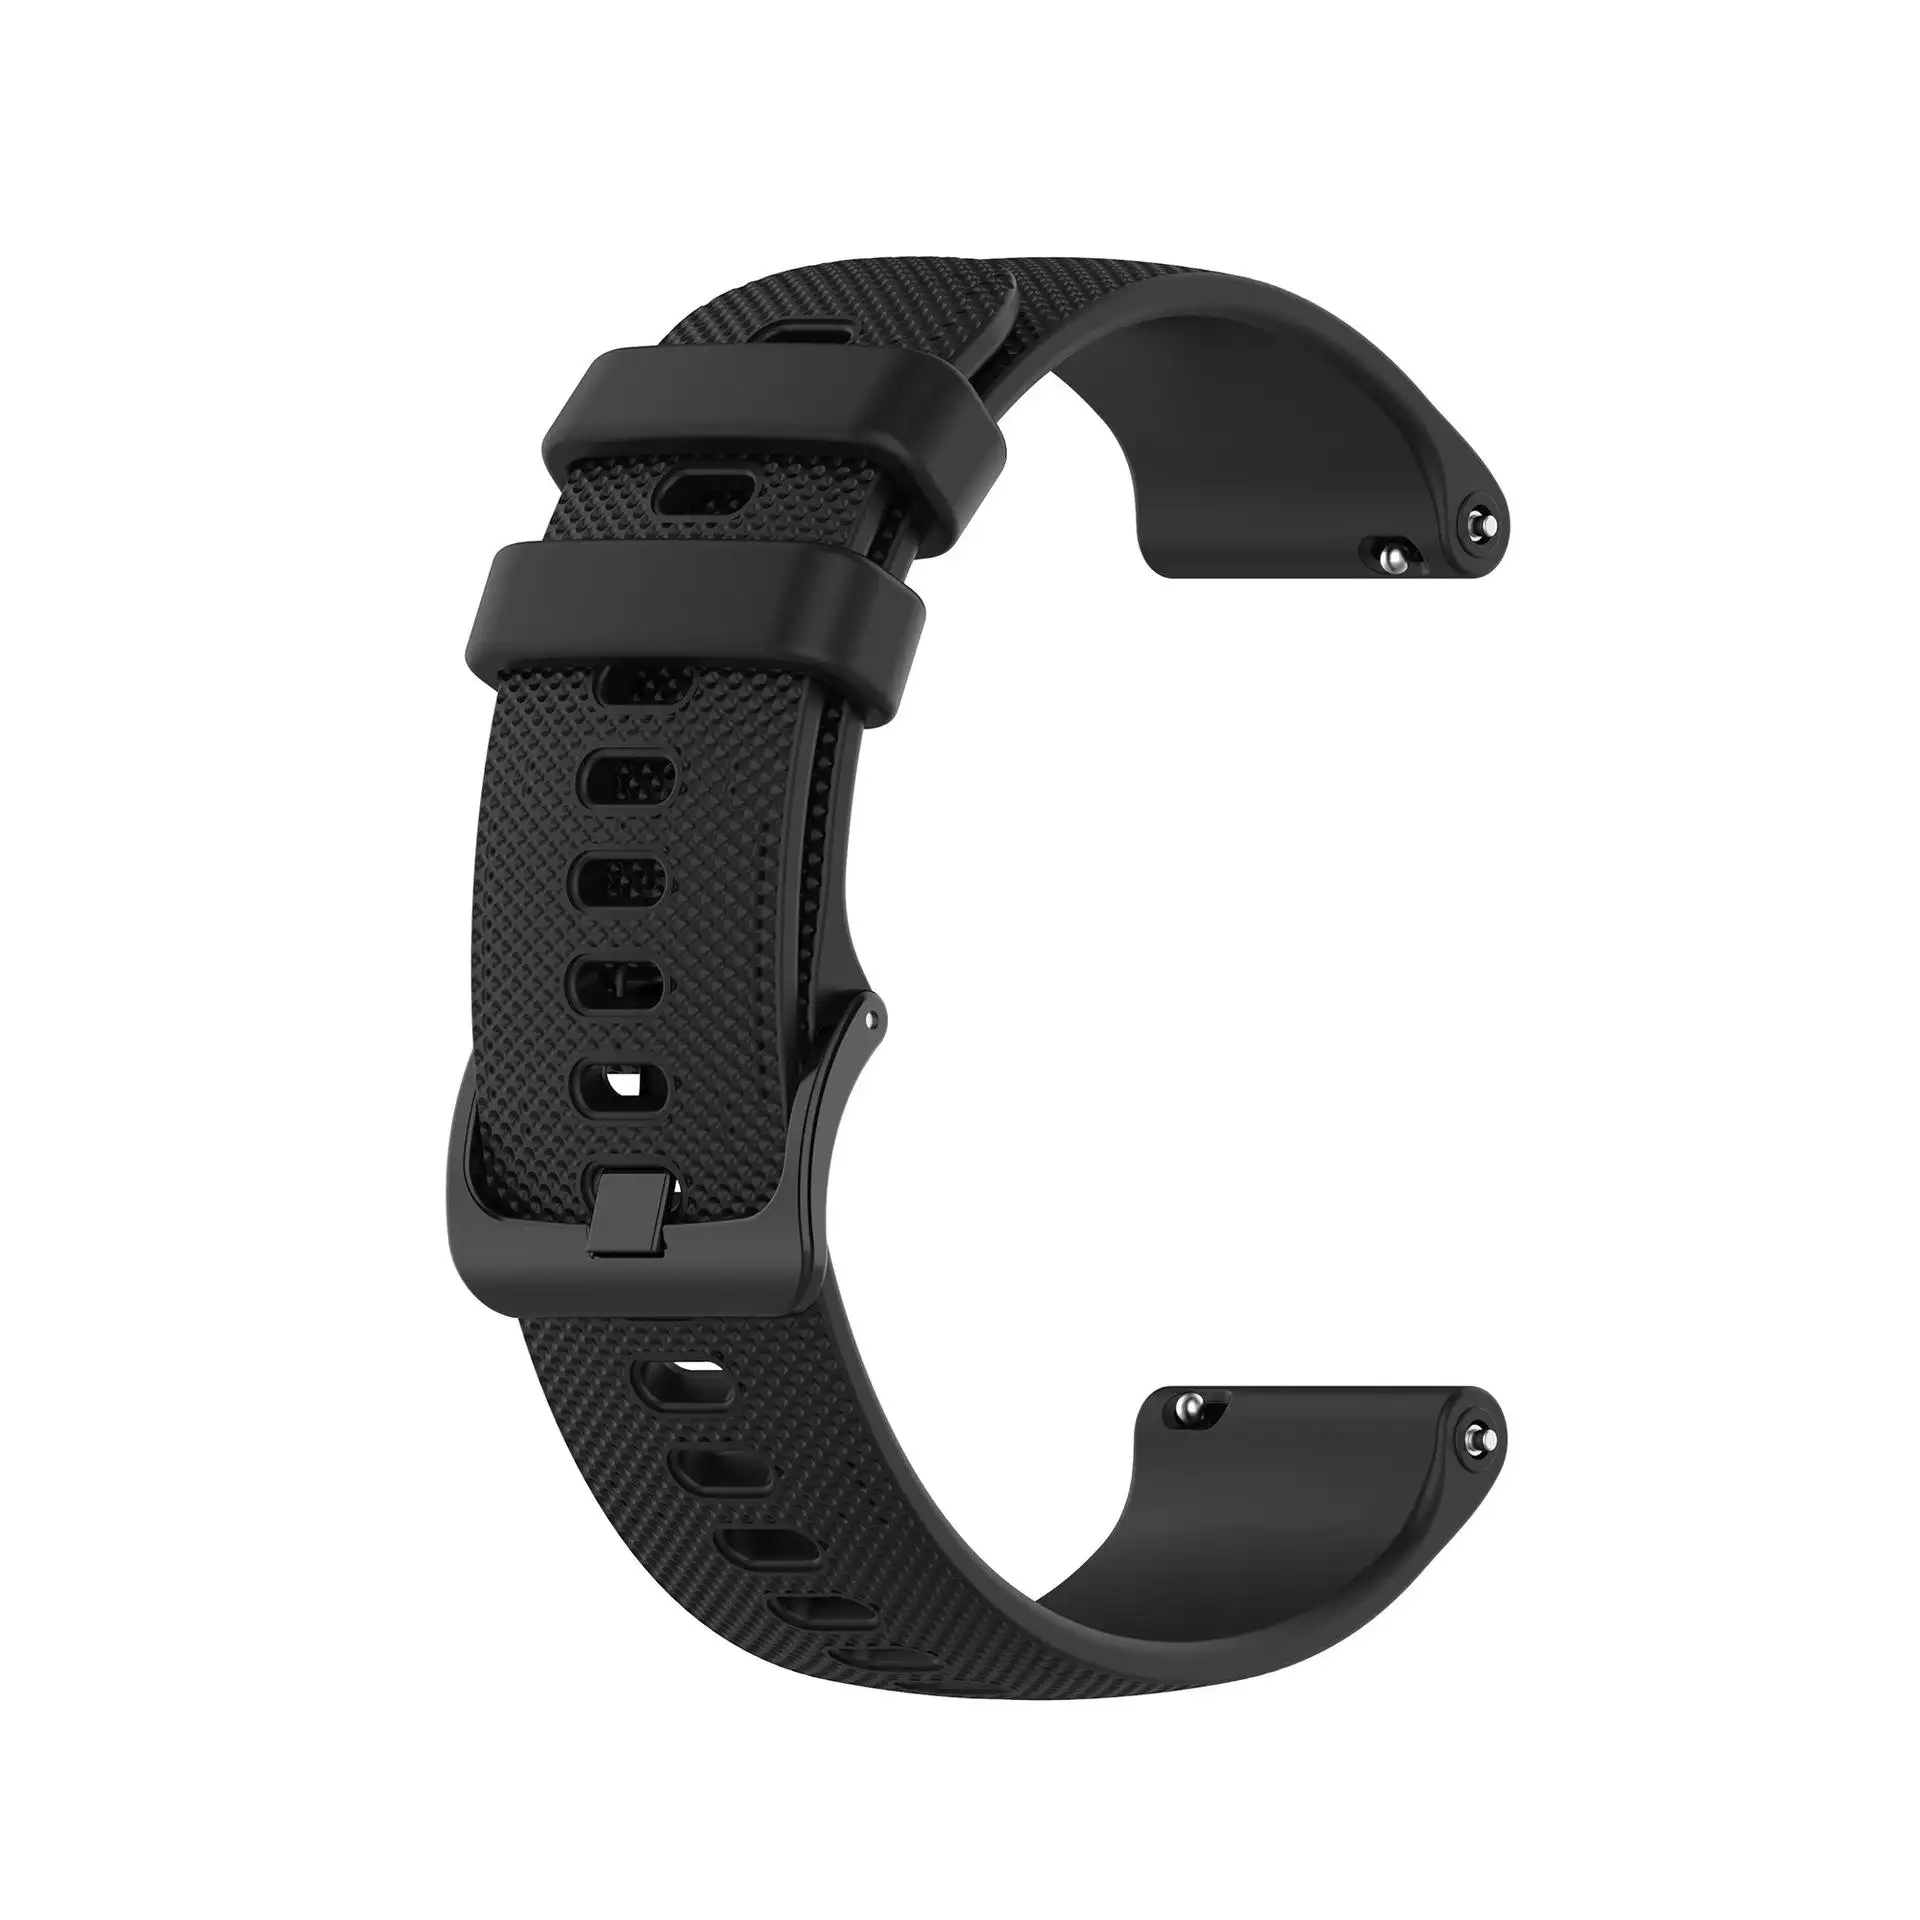 18mm 20mm 22mm Silicone for Samsung Galaxy Watch Active Gear 2 Neo S3 S2 Classic Vivoactive 3 Vivomove HR watch band strap